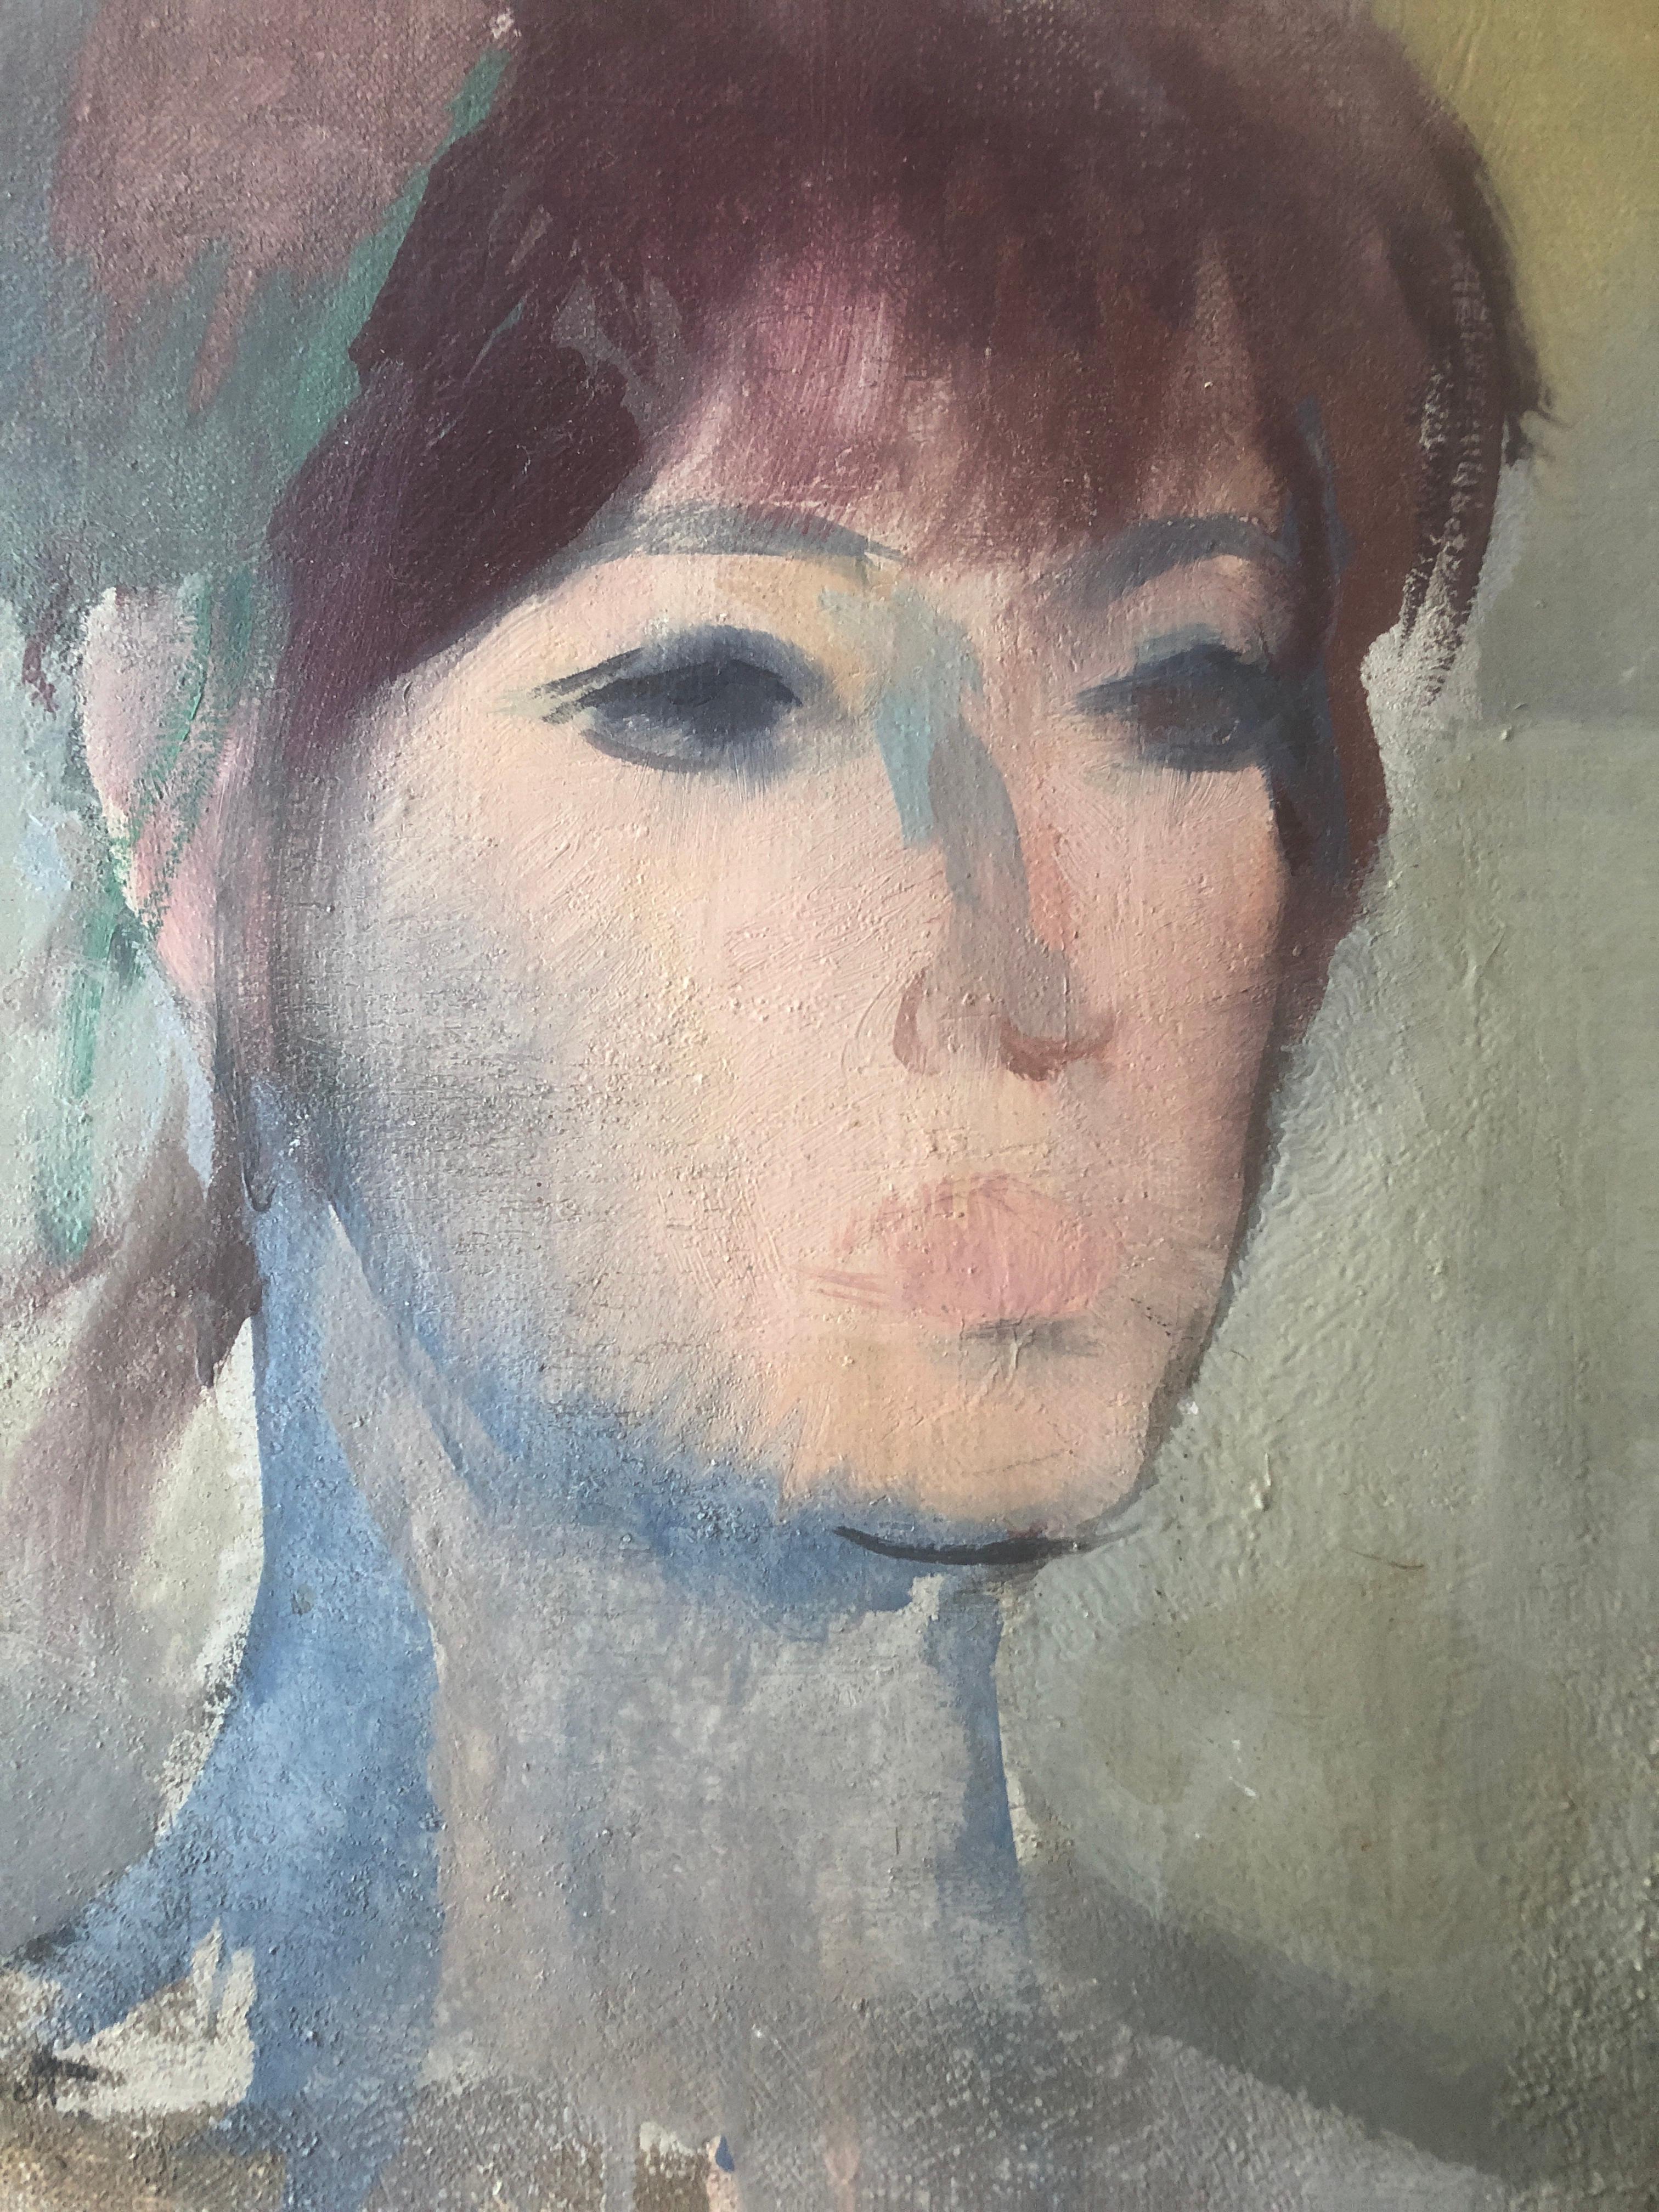 Ramon Pichot Soler (1924-1996) - woman's face - Oil on canvas
Oil measures 27x22
Frameless

Ramon Pichot i Soler (Figueres, 1924 - Barcelona, May 24, 1996) was a Catalan painter. Son of Ricard Pichot and Gironès, he began exhibiting in Barcelona in